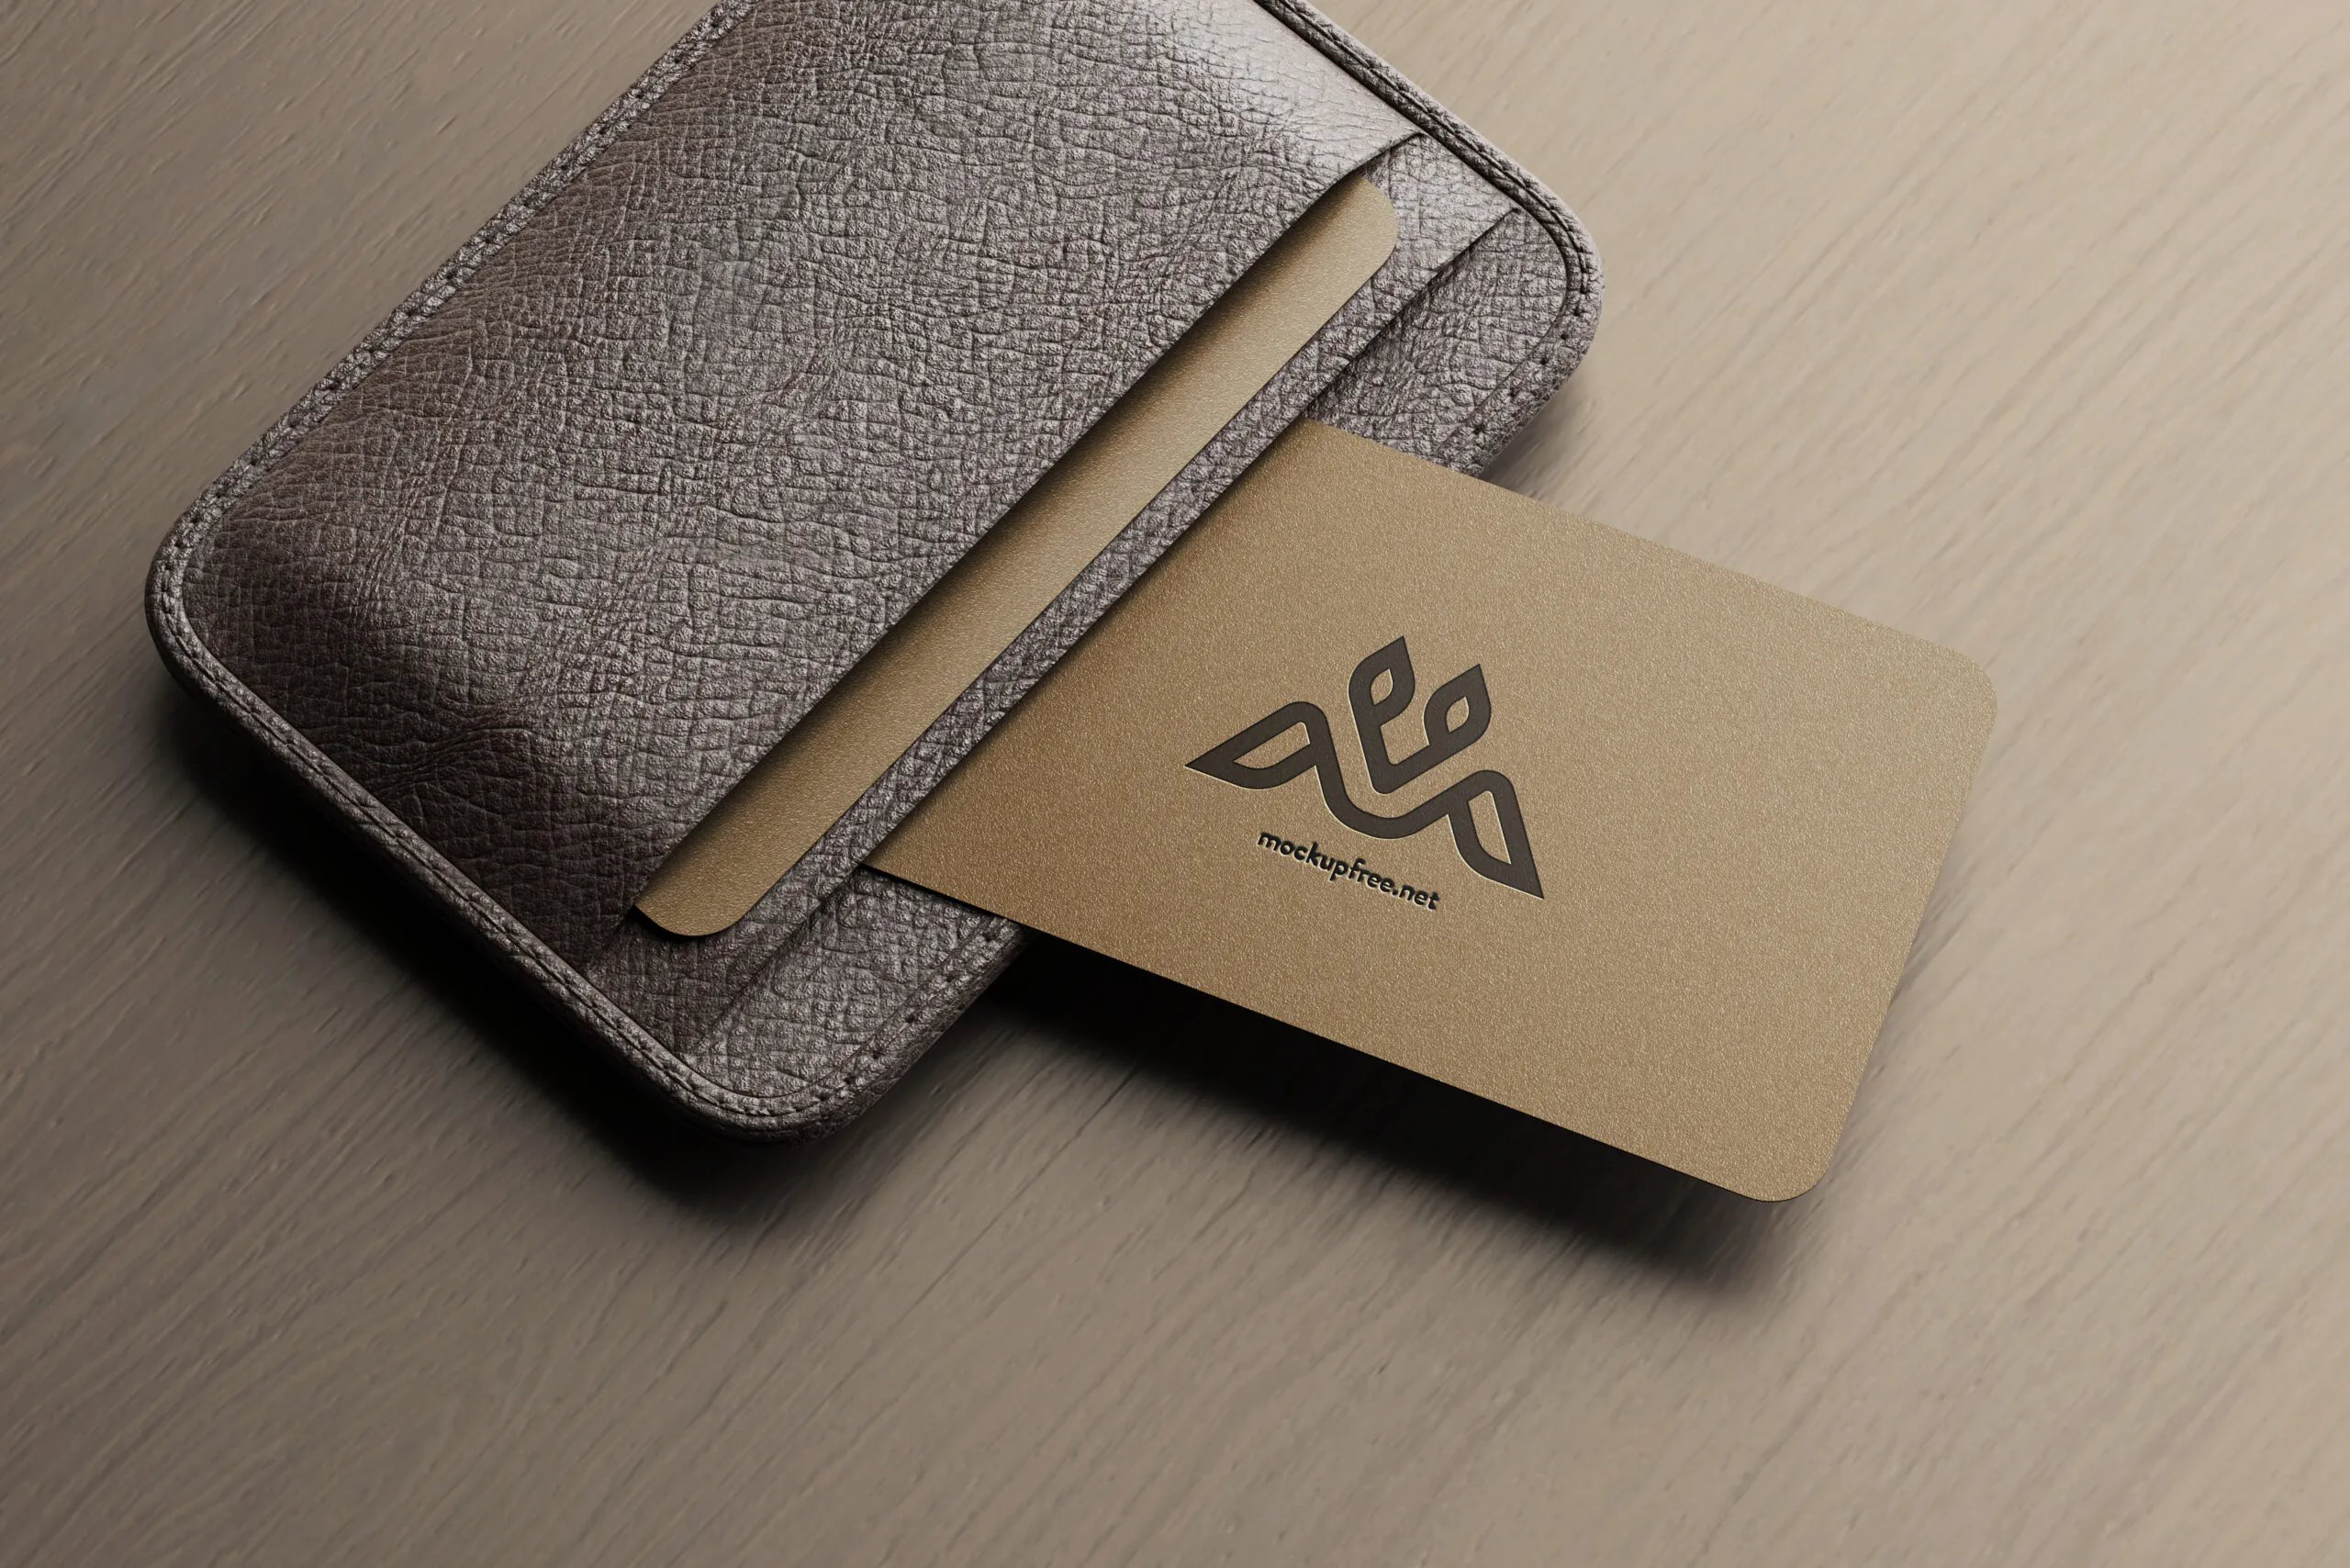 5 Business Cards Mockups with Leather Holder in Perspective View FREE PSD